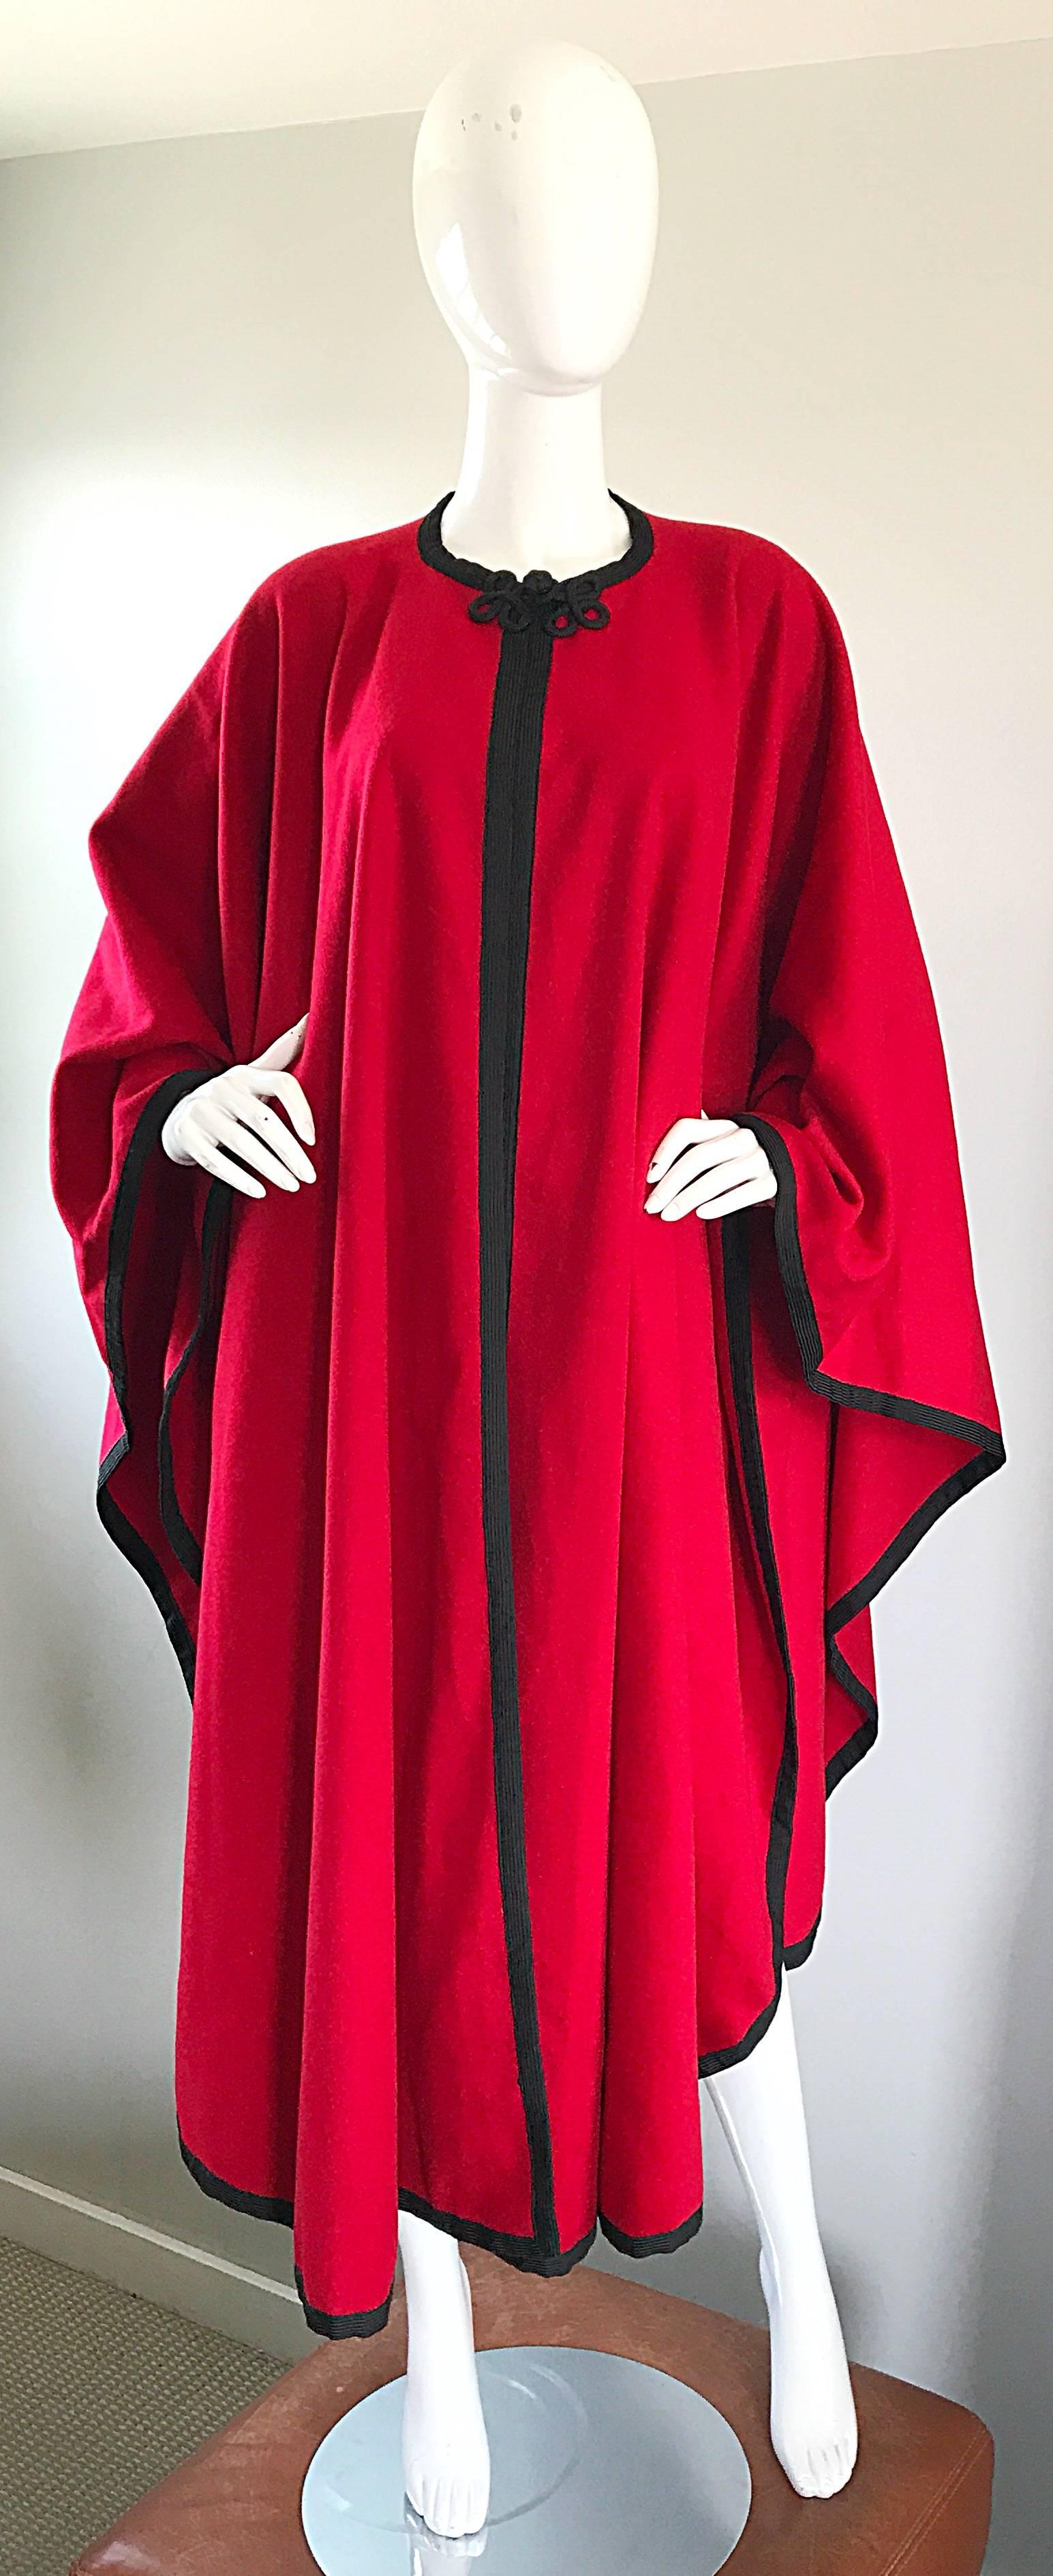 Rare Vintage Yves Saint Laurent Russian Collection 1970s Red Wool Cape Jacket 2